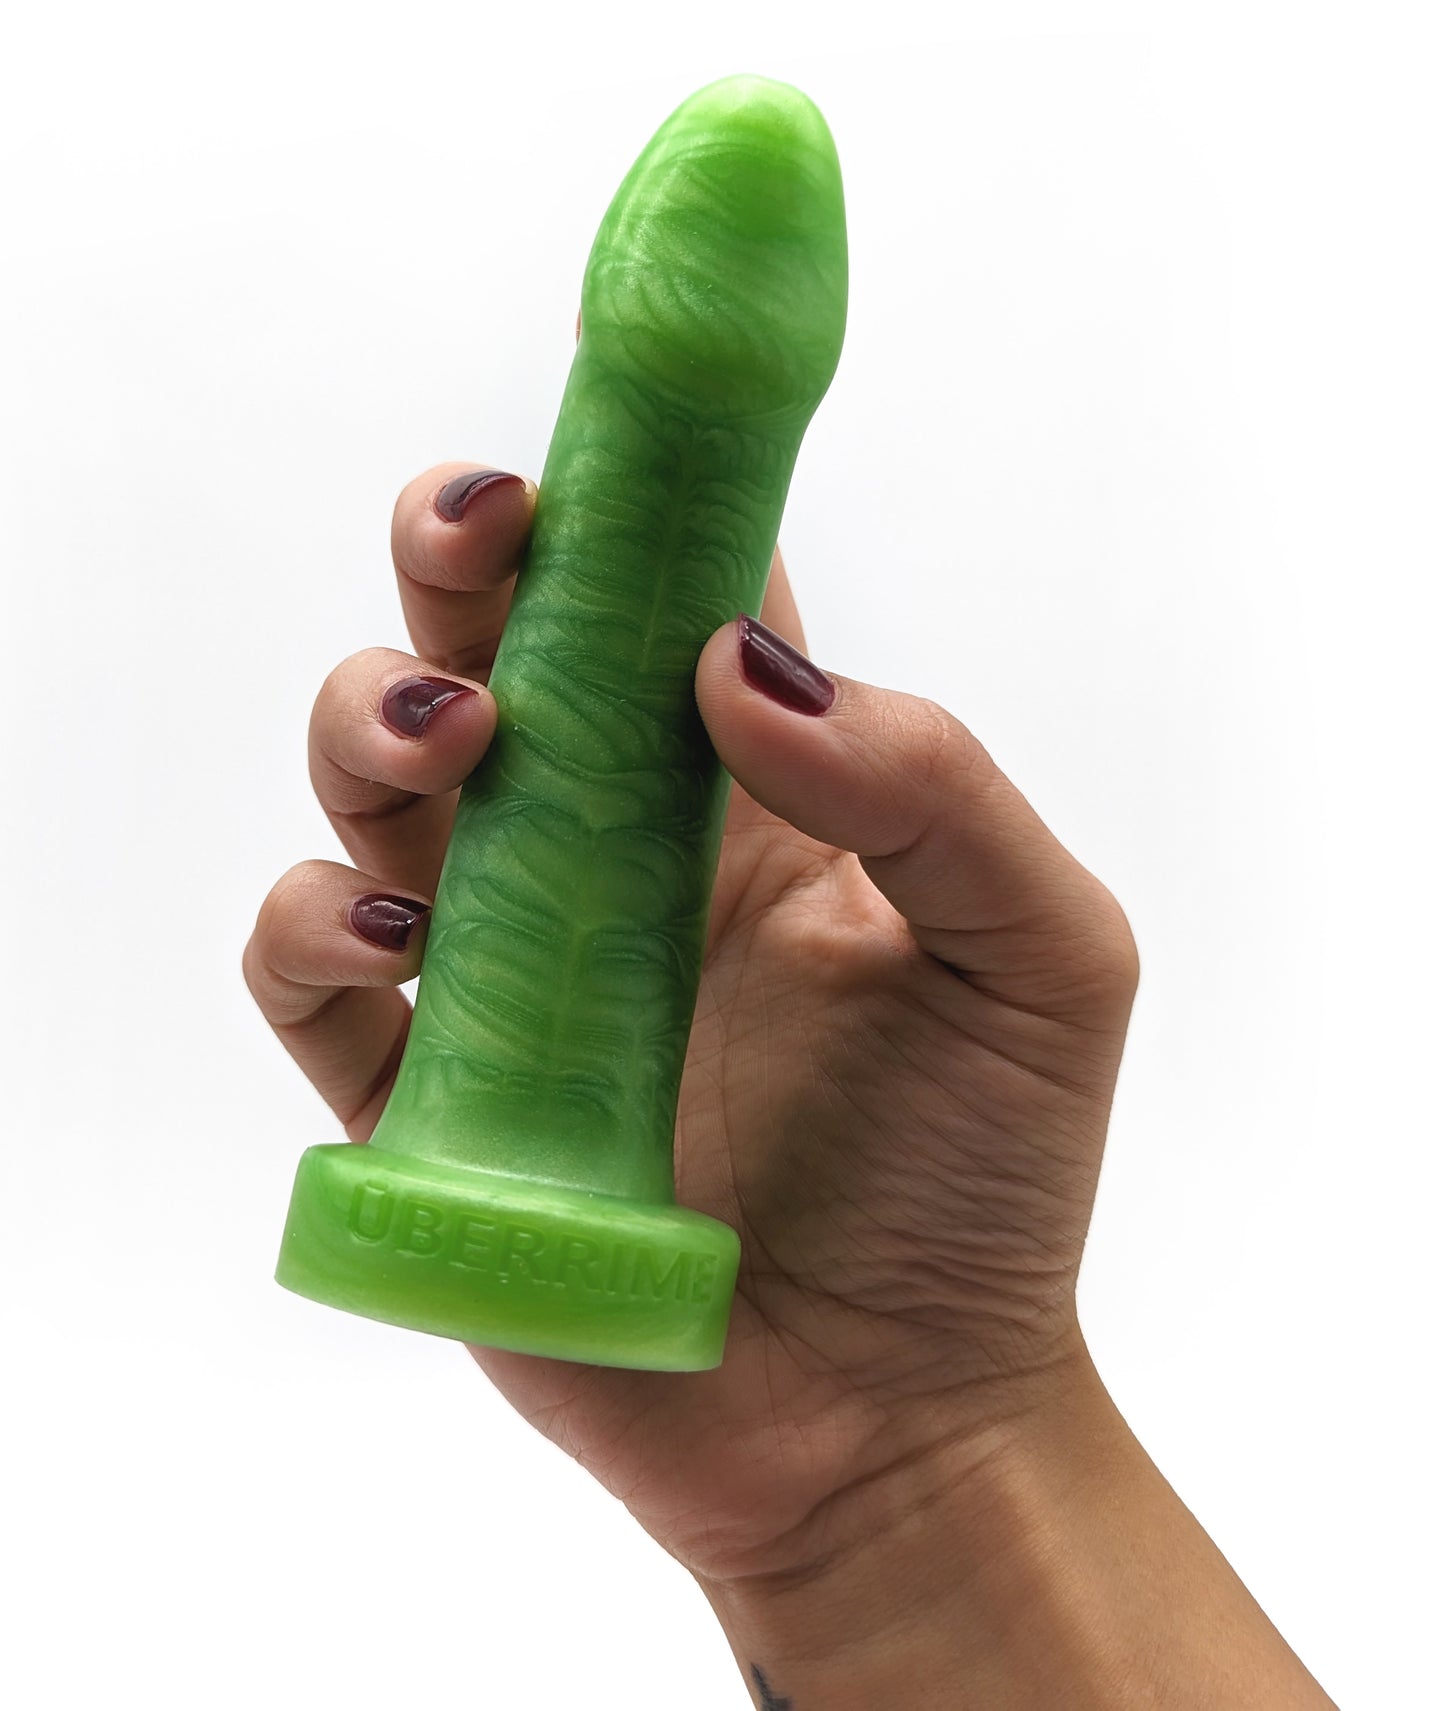 A hand holding up a beginner-friendly silicone dildo, the Uberrime Essential Model A. The toy is a semi-realistic design with an abstractly defined head and subtly curved shaft for g-spot stimulation. It has a flat, flared base. 